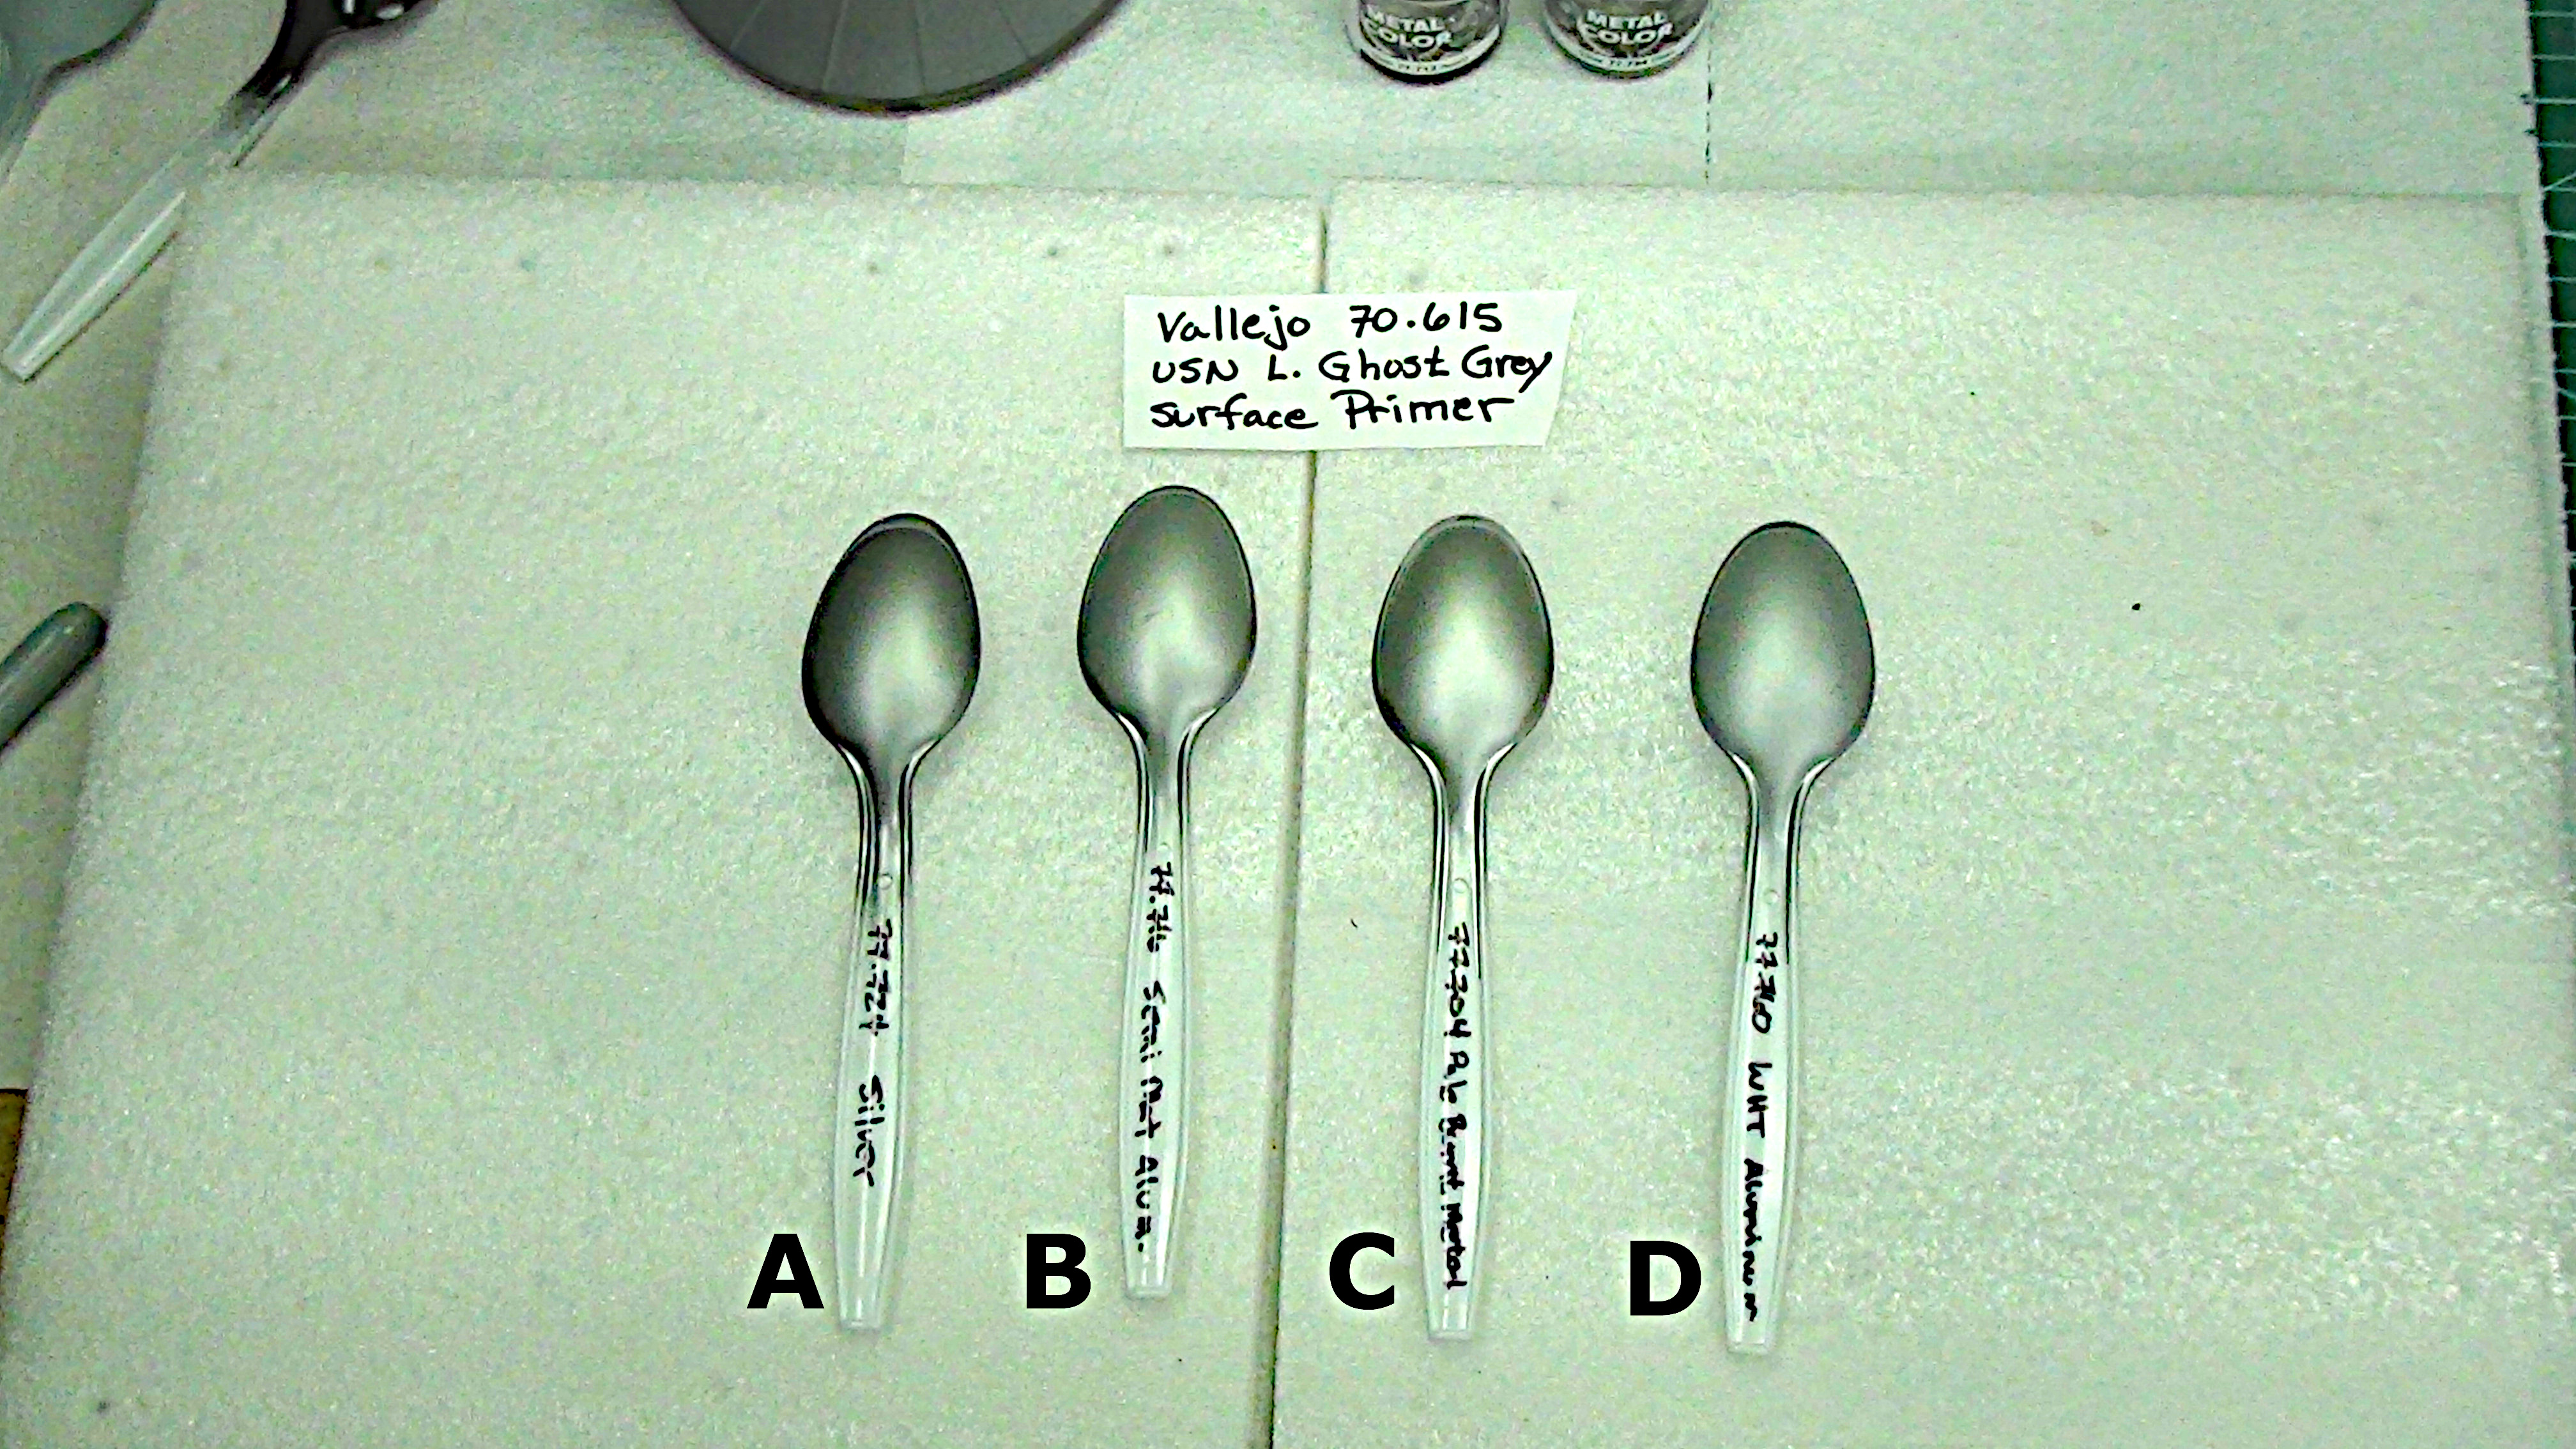 More test spoons for body color